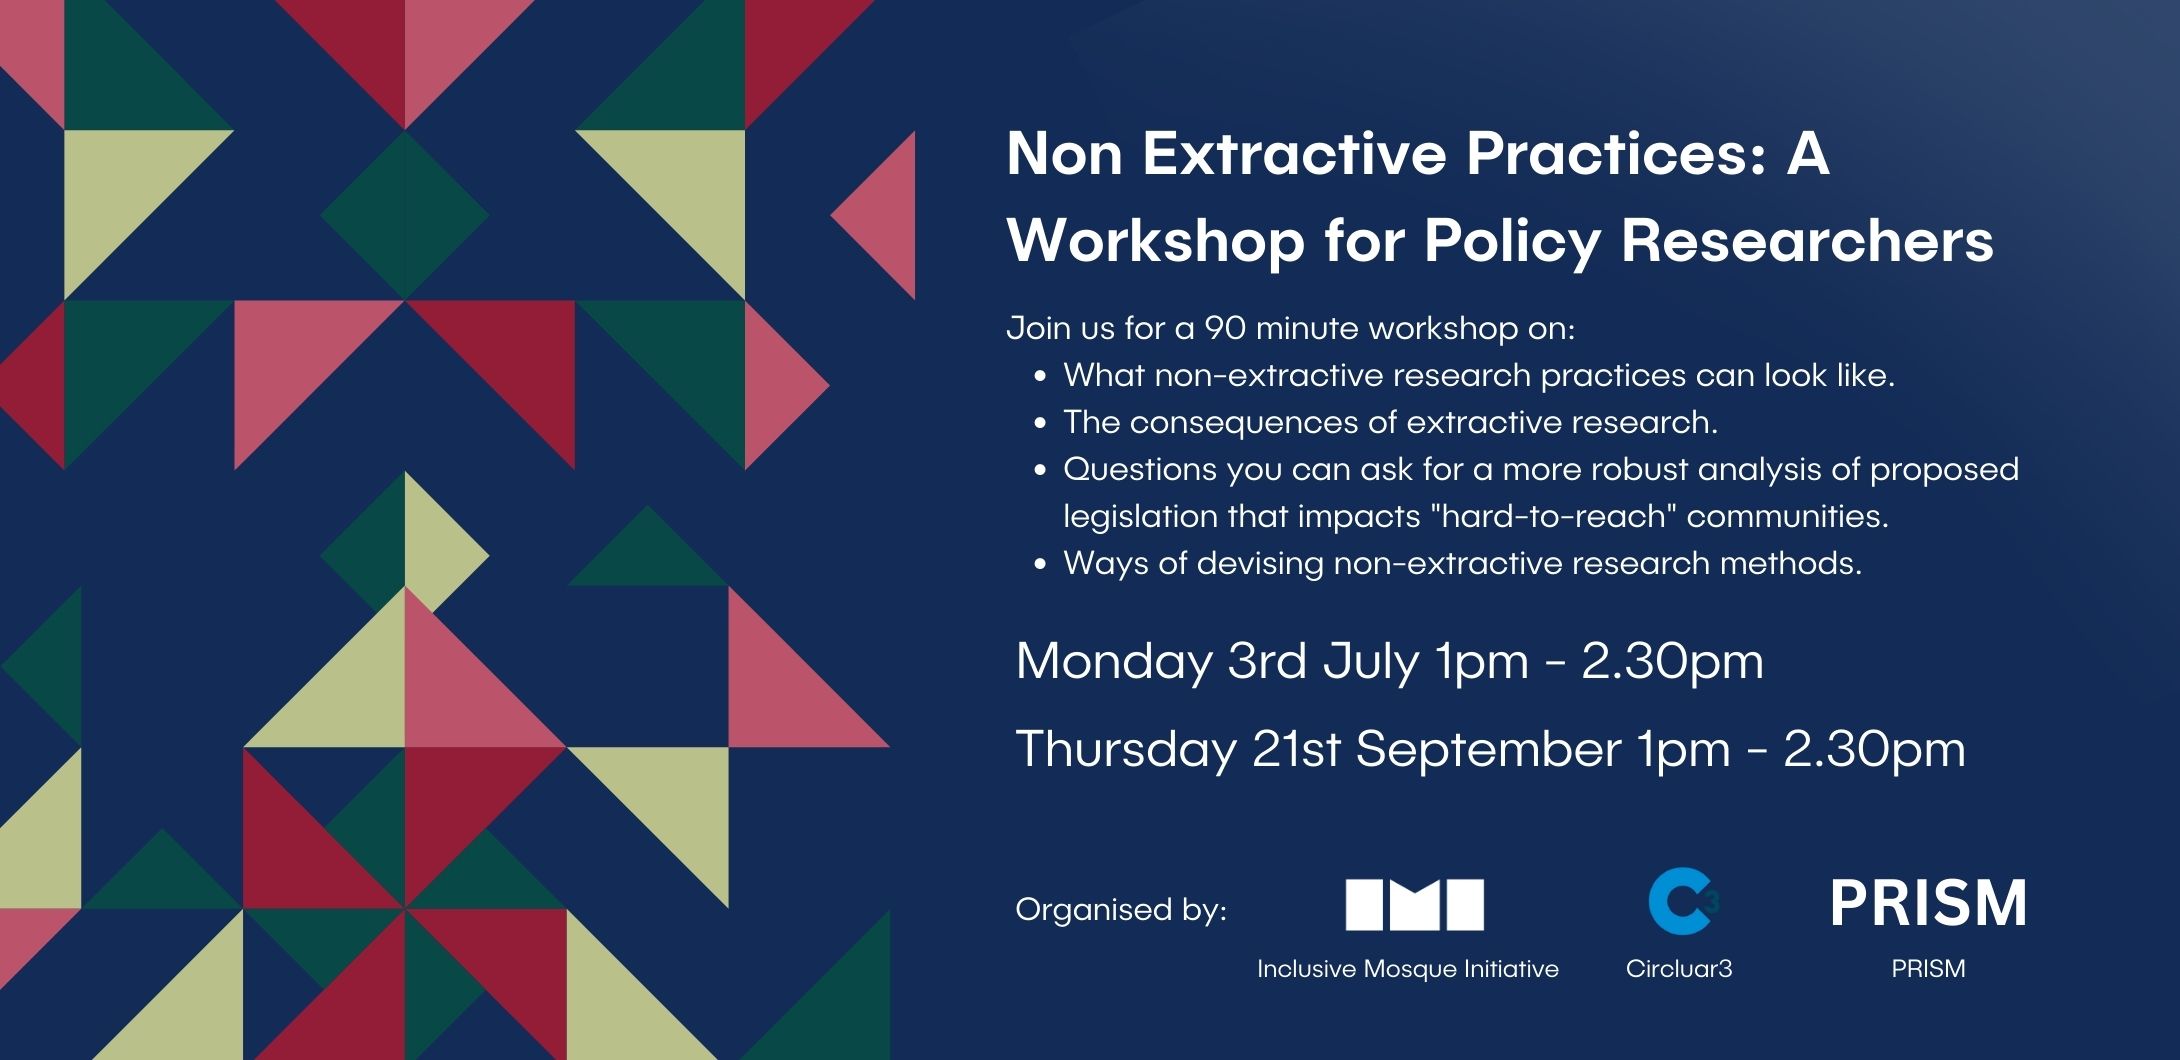 A geometric graphic on a dark blue background. The image has text about the event, including the title: 'Non Extractive Research Practices in Policy Development' and a message reading 'Register via Eventbrite'.